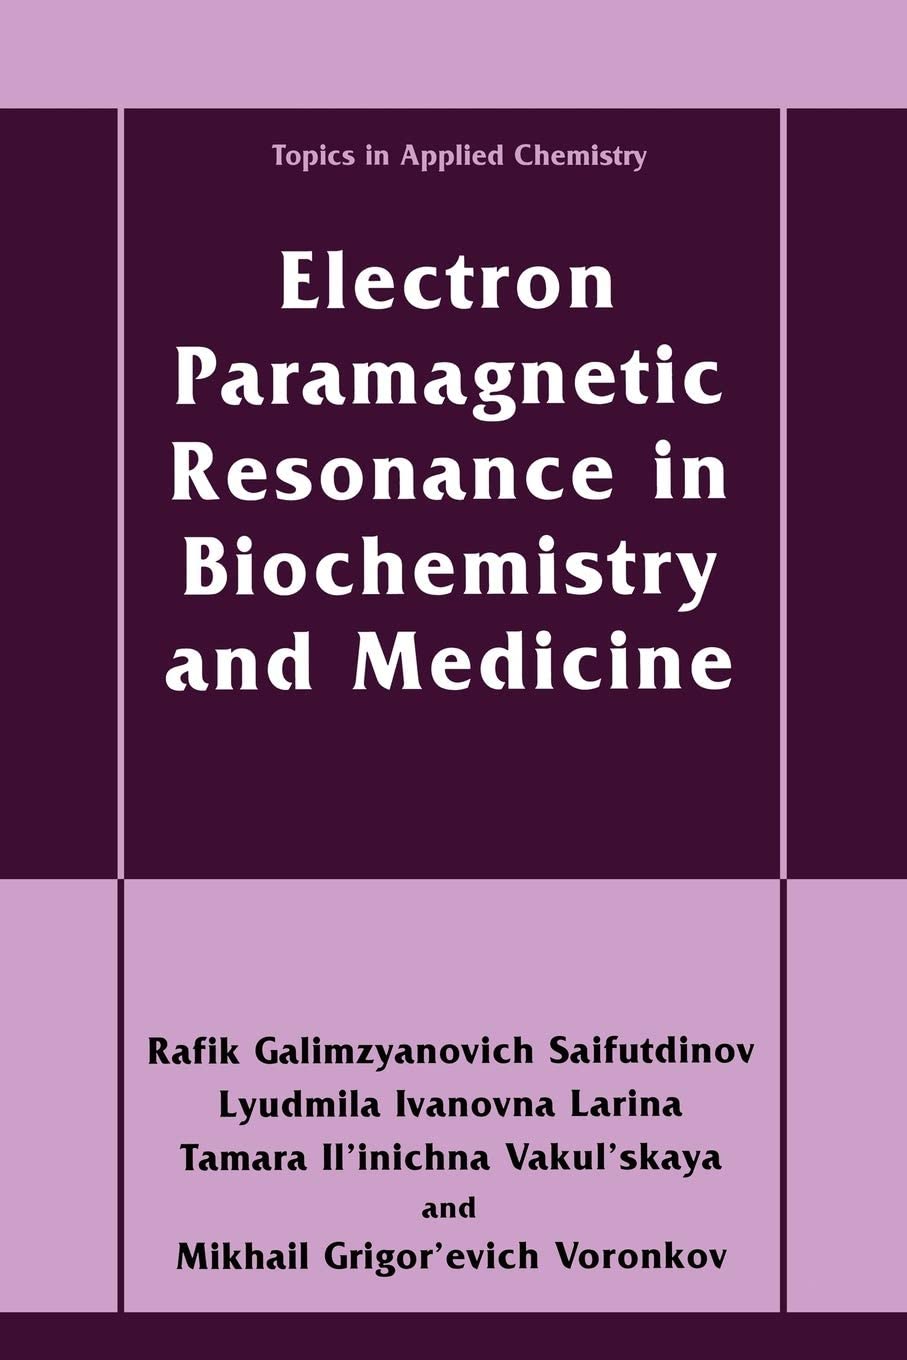 Electron Paramagnetic Resonance in Biochemistry and Medicine (Topics in Applied Chemistry)